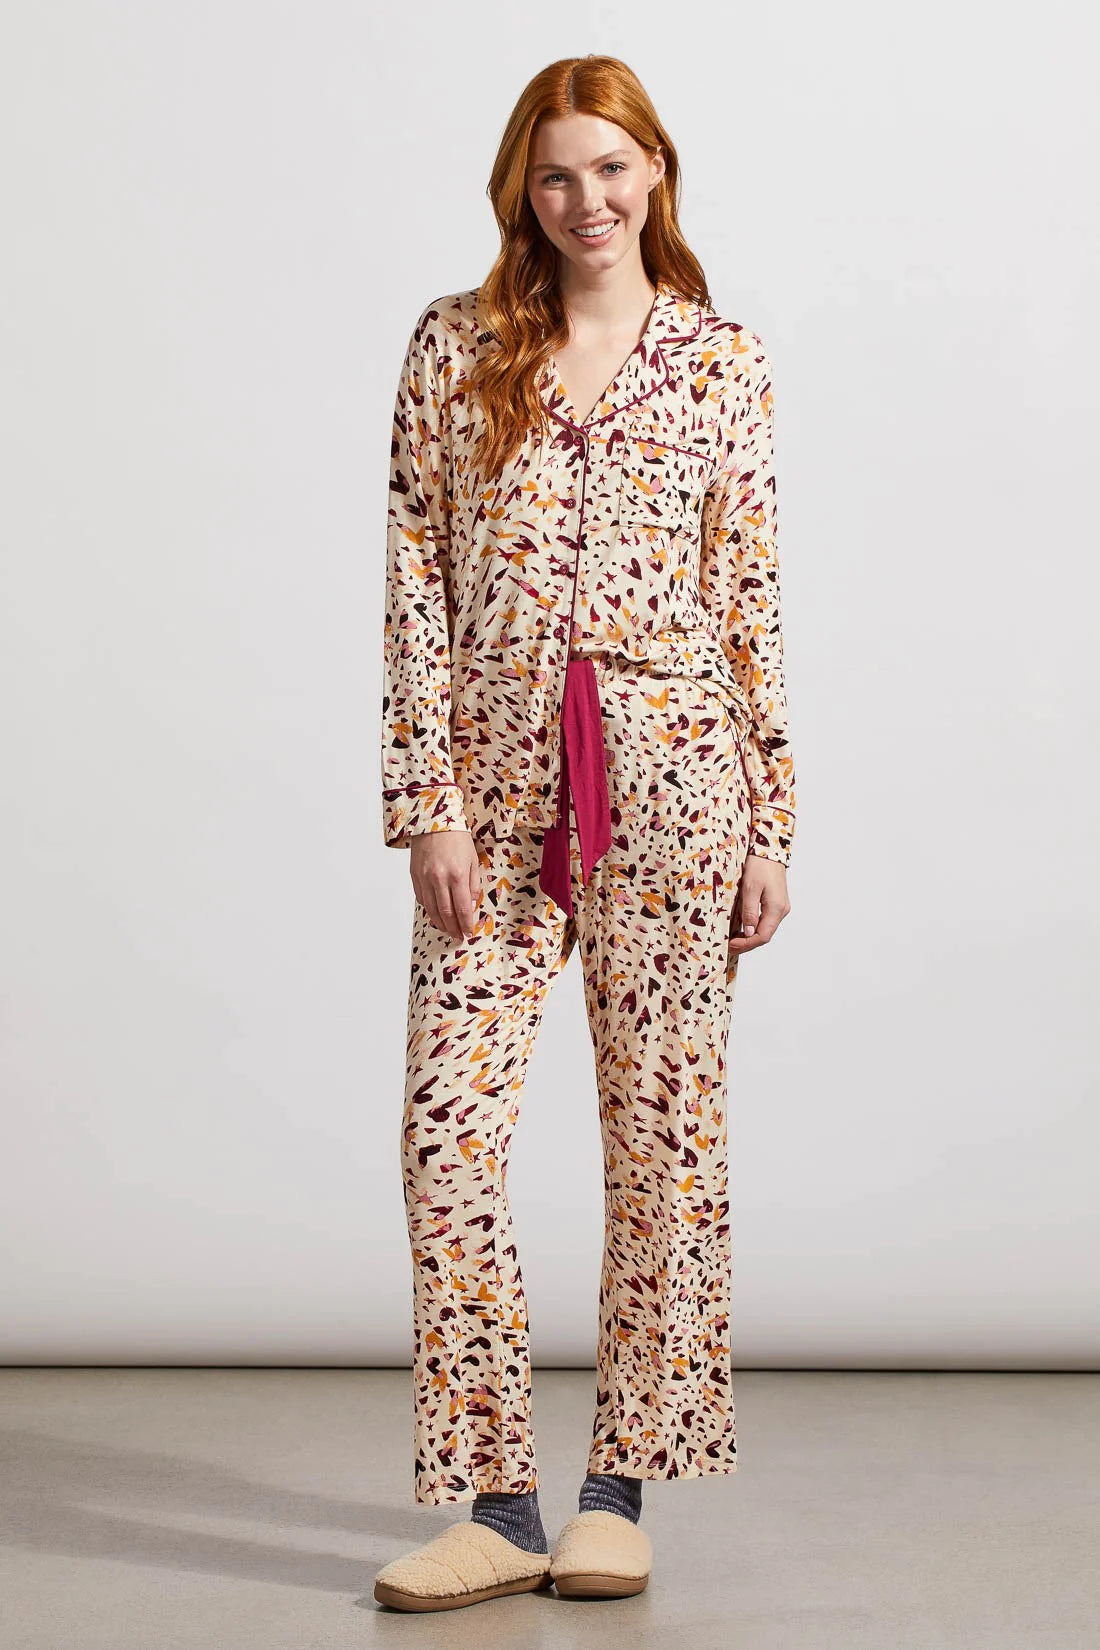 Get your beauty sleep while looking fabulous courtesy of this printed pajama set made from soft jersey fabric.